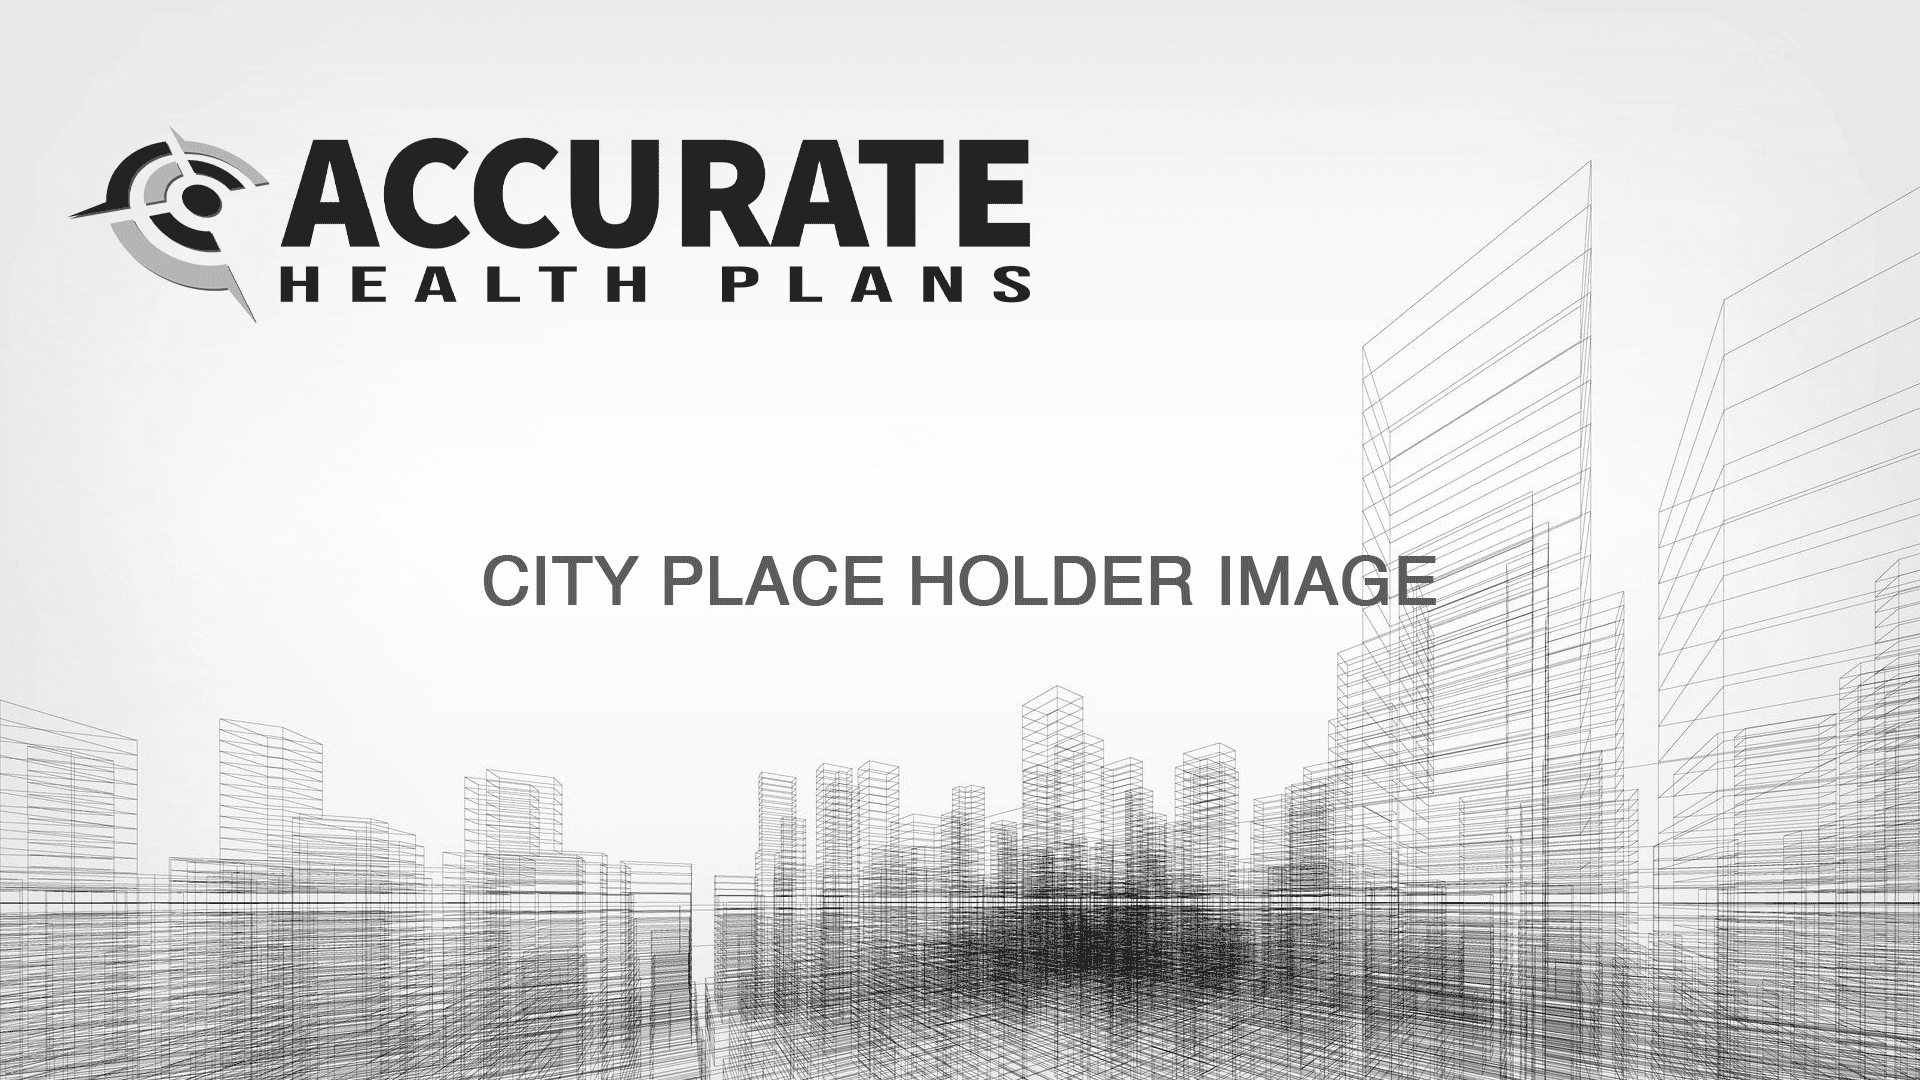 Accurate Health Plans City Image Holder